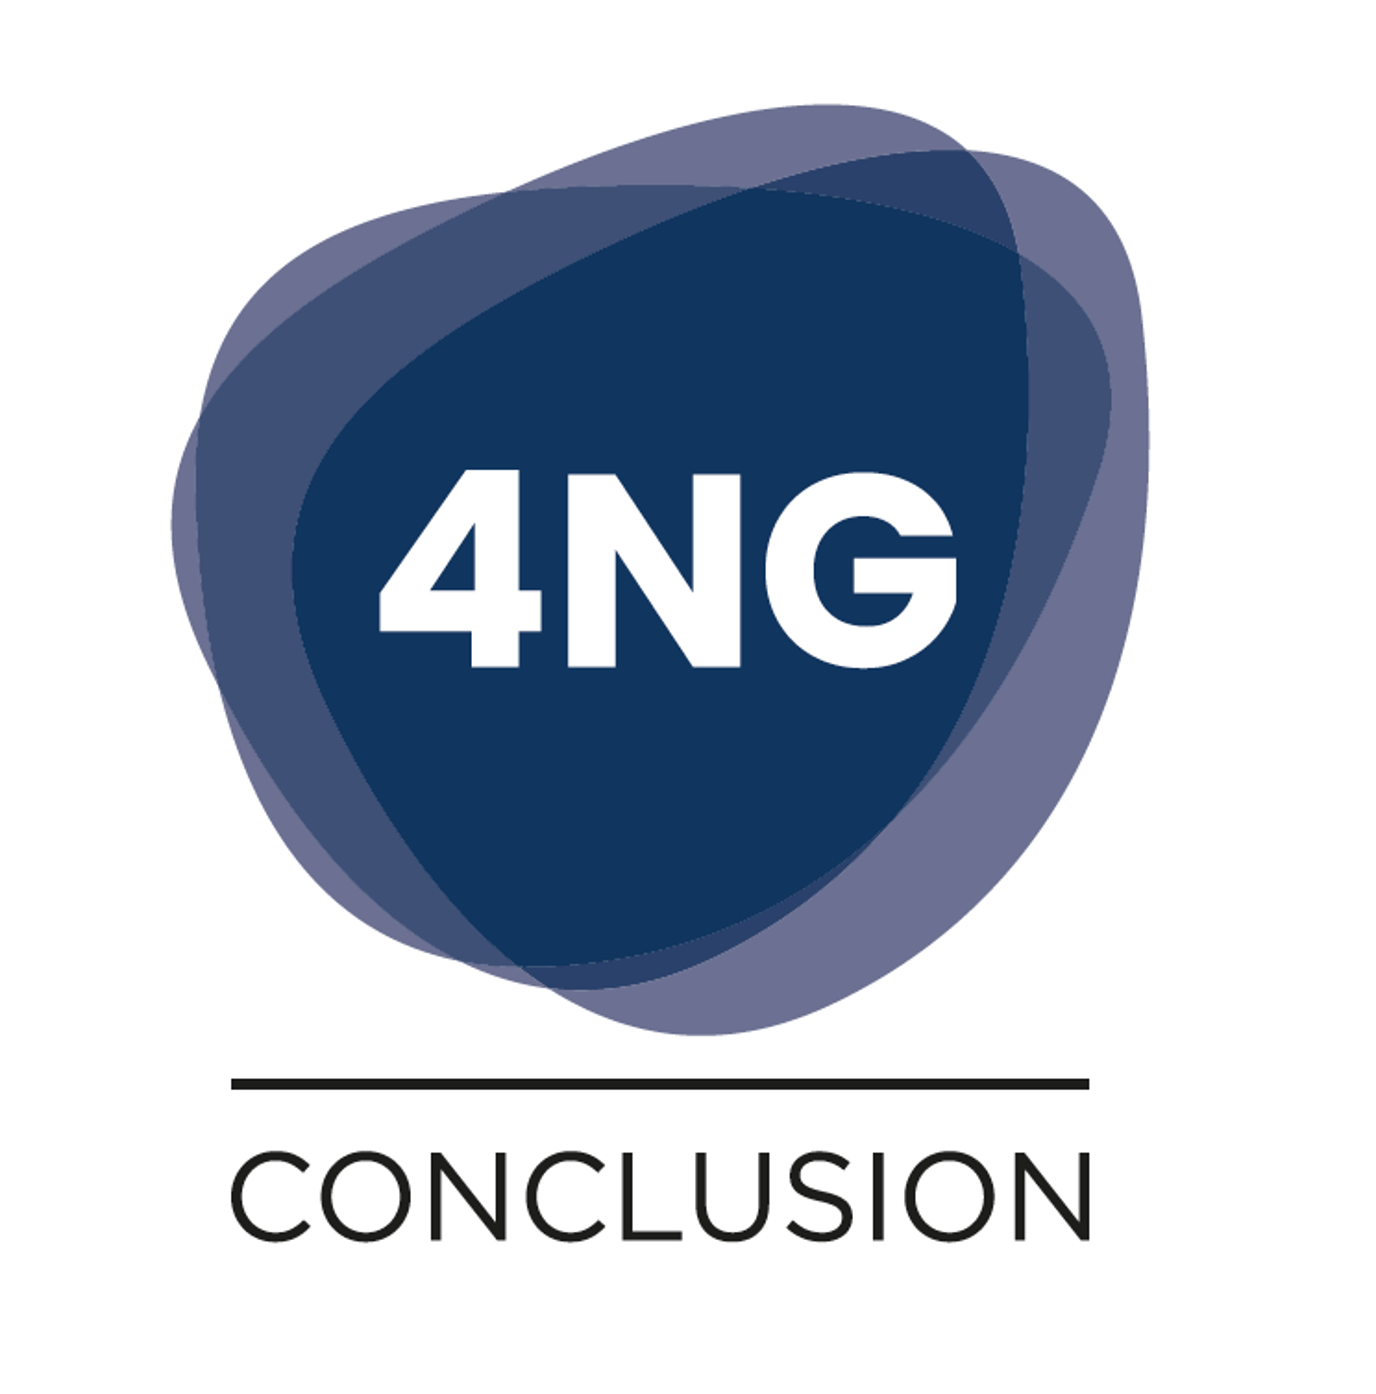 4Ng Conclusion